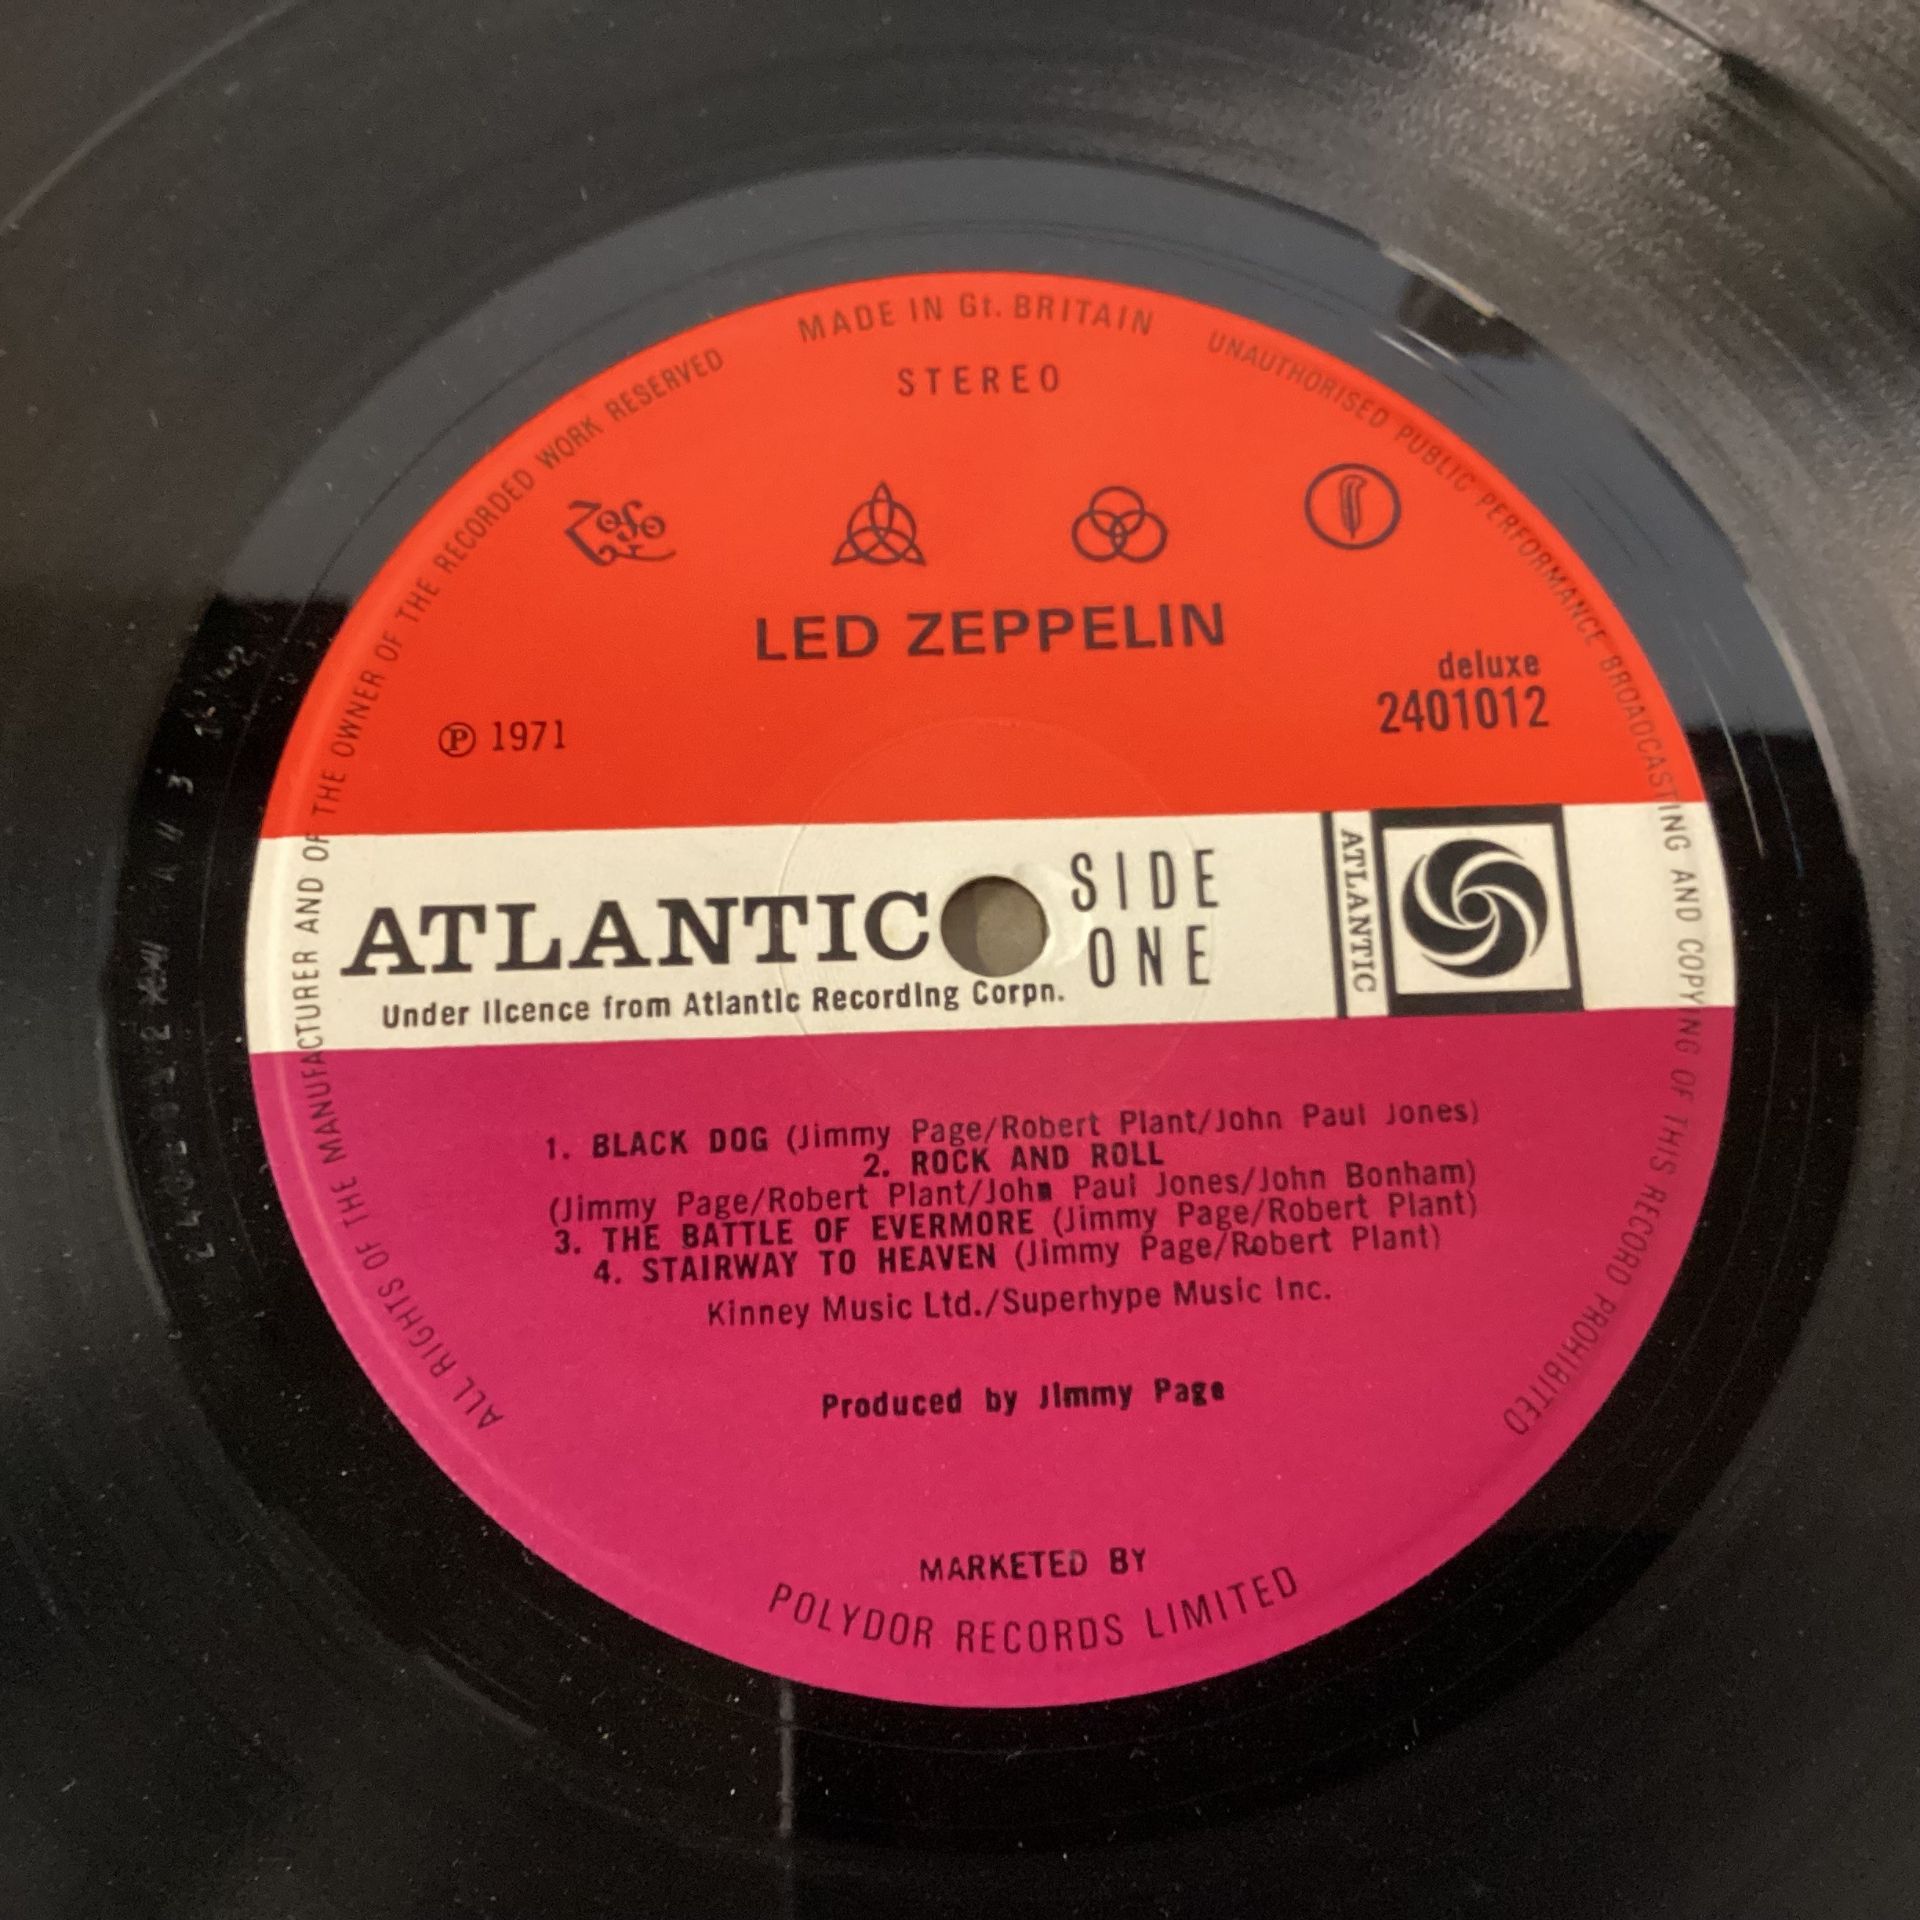 LED ZEPPELIN 1V (4) ATLANTIC RED PLUM LABEL. Rare UK 1971 Early Pressing on the Atlantic Plum and - Image 4 of 5